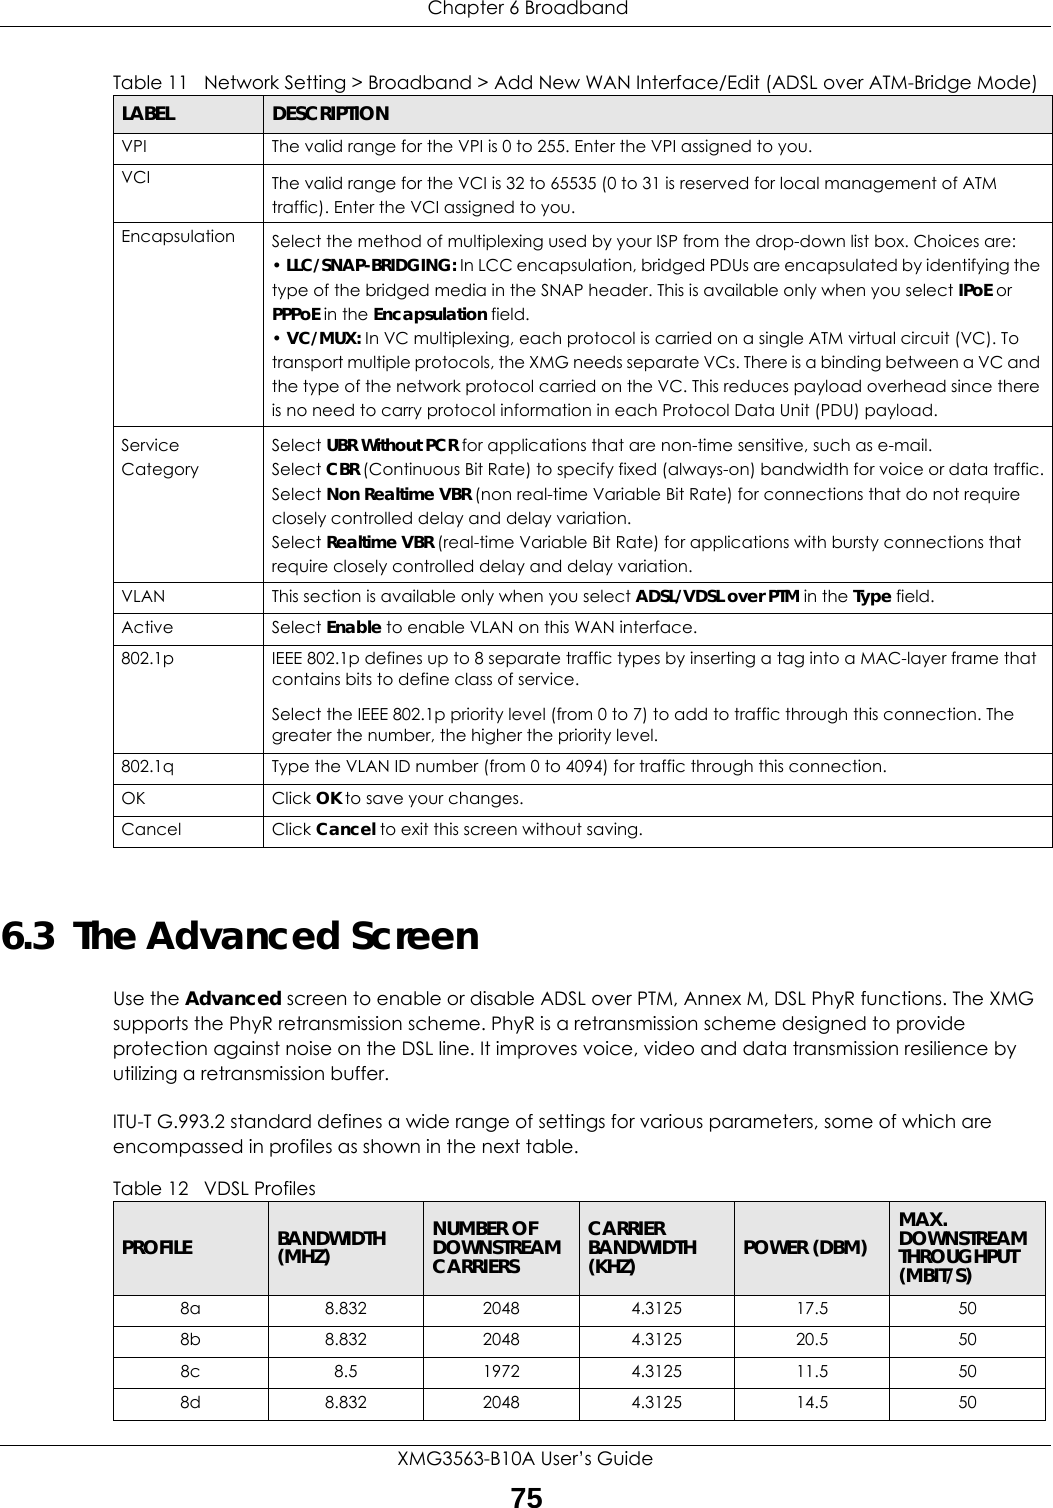  Chapter 6 BroadbandXMG3563-B10A User’s Guide756.3  The Advanced ScreenUse the Advanced screen to enable or disable ADSL over PTM, Annex M, DSL PhyR functions. The XMG supports the PhyR retransmission scheme. PhyR is a retransmission scheme designed to provide protection against noise on the DSL line. It improves voice, video and data transmission resilience by utilizing a retransmission buffer.ITU-T G.993.2 standard defines a wide range of settings for various parameters, some of which are encompassed in profiles as shown in the next table. VPI The valid range for the VPI is 0 to 255. Enter the VPI assigned to you.VCI The valid range for the VCI is 32 to 65535 (0 to 31 is reserved for local management of ATM traffic). Enter the VCI assigned to you.Encapsulation Select the method of multiplexing used by your ISP from the drop-down list box. Choices are:• LLC/SNAP-BRIDGING: In LCC encapsulation, bridged PDUs are encapsulated by identifying the type of the bridged media in the SNAP header. This is available only when you select IPoE or PPPoE in the Encapsulation field.• VC/MUX: In VC multiplexing, each protocol is carried on a single ATM virtual circuit (VC). To transport multiple protocols, the XMG needs separate VCs. There is a binding between a VC and the type of the network protocol carried on the VC. This reduces payload overhead since there is no need to carry protocol information in each Protocol Data Unit (PDU) payload.Service CategorySelect UBR Without PCR for applications that are non-time sensitive, such as e-mail.Select CBR (Continuous Bit Rate) to specify fixed (always-on) bandwidth for voice or data traffic.Select Non Realtime VBR (non real-time Variable Bit Rate) for connections that do not require closely controlled delay and delay variation.Select Realtime VBR (real-time Variable Bit Rate) for applications with bursty connections that require closely controlled delay and delay variation.VLAN This section is available only when you select ADSL/VDSL over PTM in the Type field.Active Select Enable to enable VLAN on this WAN interface.802.1p IEEE 802.1p defines up to 8 separate traffic types by inserting a tag into a MAC-layer frame that contains bits to define class of service. Select the IEEE 802.1p priority level (from 0 to 7) to add to traffic through this connection. The greater the number, the higher the priority level.802.1q Type the VLAN ID number (from 0 to 4094) for traffic through this connection.OK Click OK to save your changes.Cancel Click Cancel to exit this screen without saving.Table 11   Network Setting &gt; Broadband &gt; Add New WAN Interface/Edit (ADSL over ATM-Bridge Mode) LABEL DESCRIPTIONTable 12   VDSL Profiles PROFILE BANDWIDTH (MHZ) NUMBER OF DOWNSTREAM CARRIERSCARRIER BANDWIDTH (KHZ) POWER (DBM) MAX. DOWNSTREAM THROUGHPUT (MBIT/S)8a 8.832 2048 4.3125 17.5 508b 8.832 2048 4.3125 20.5 508c 8.5 1972 4.3125 11.5 508d 8.832 2048 4.3125 14.5 50